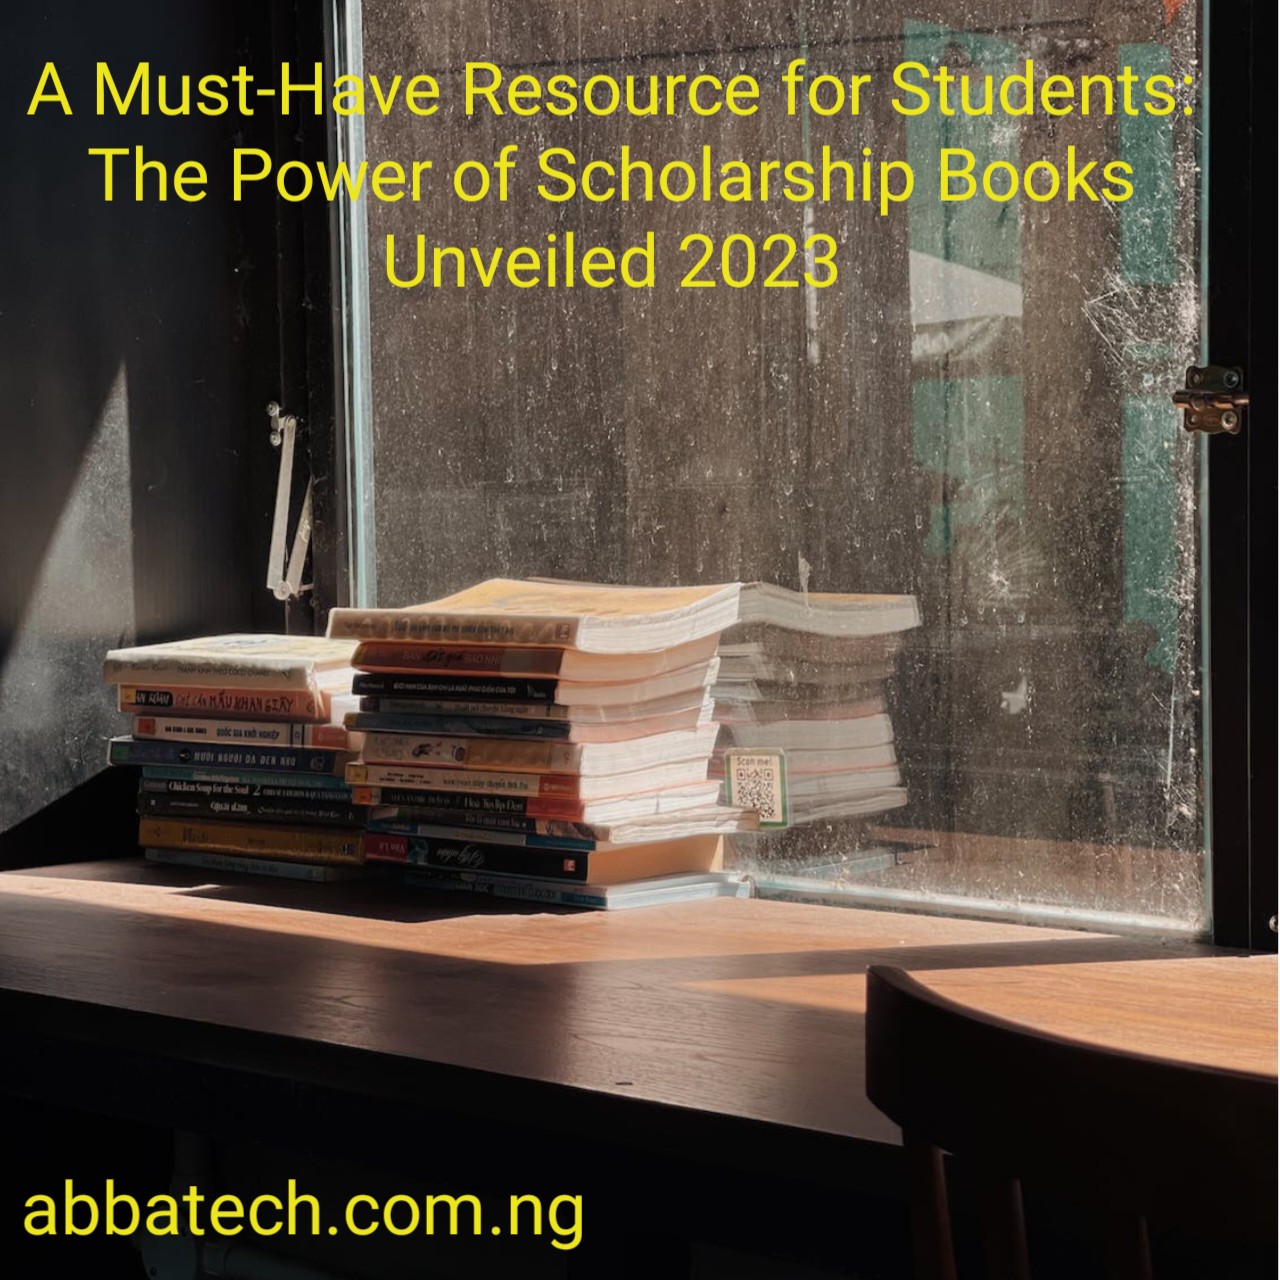 A Must-Have Resource for Students: The Power of Scholarship Books Unveiled 2023